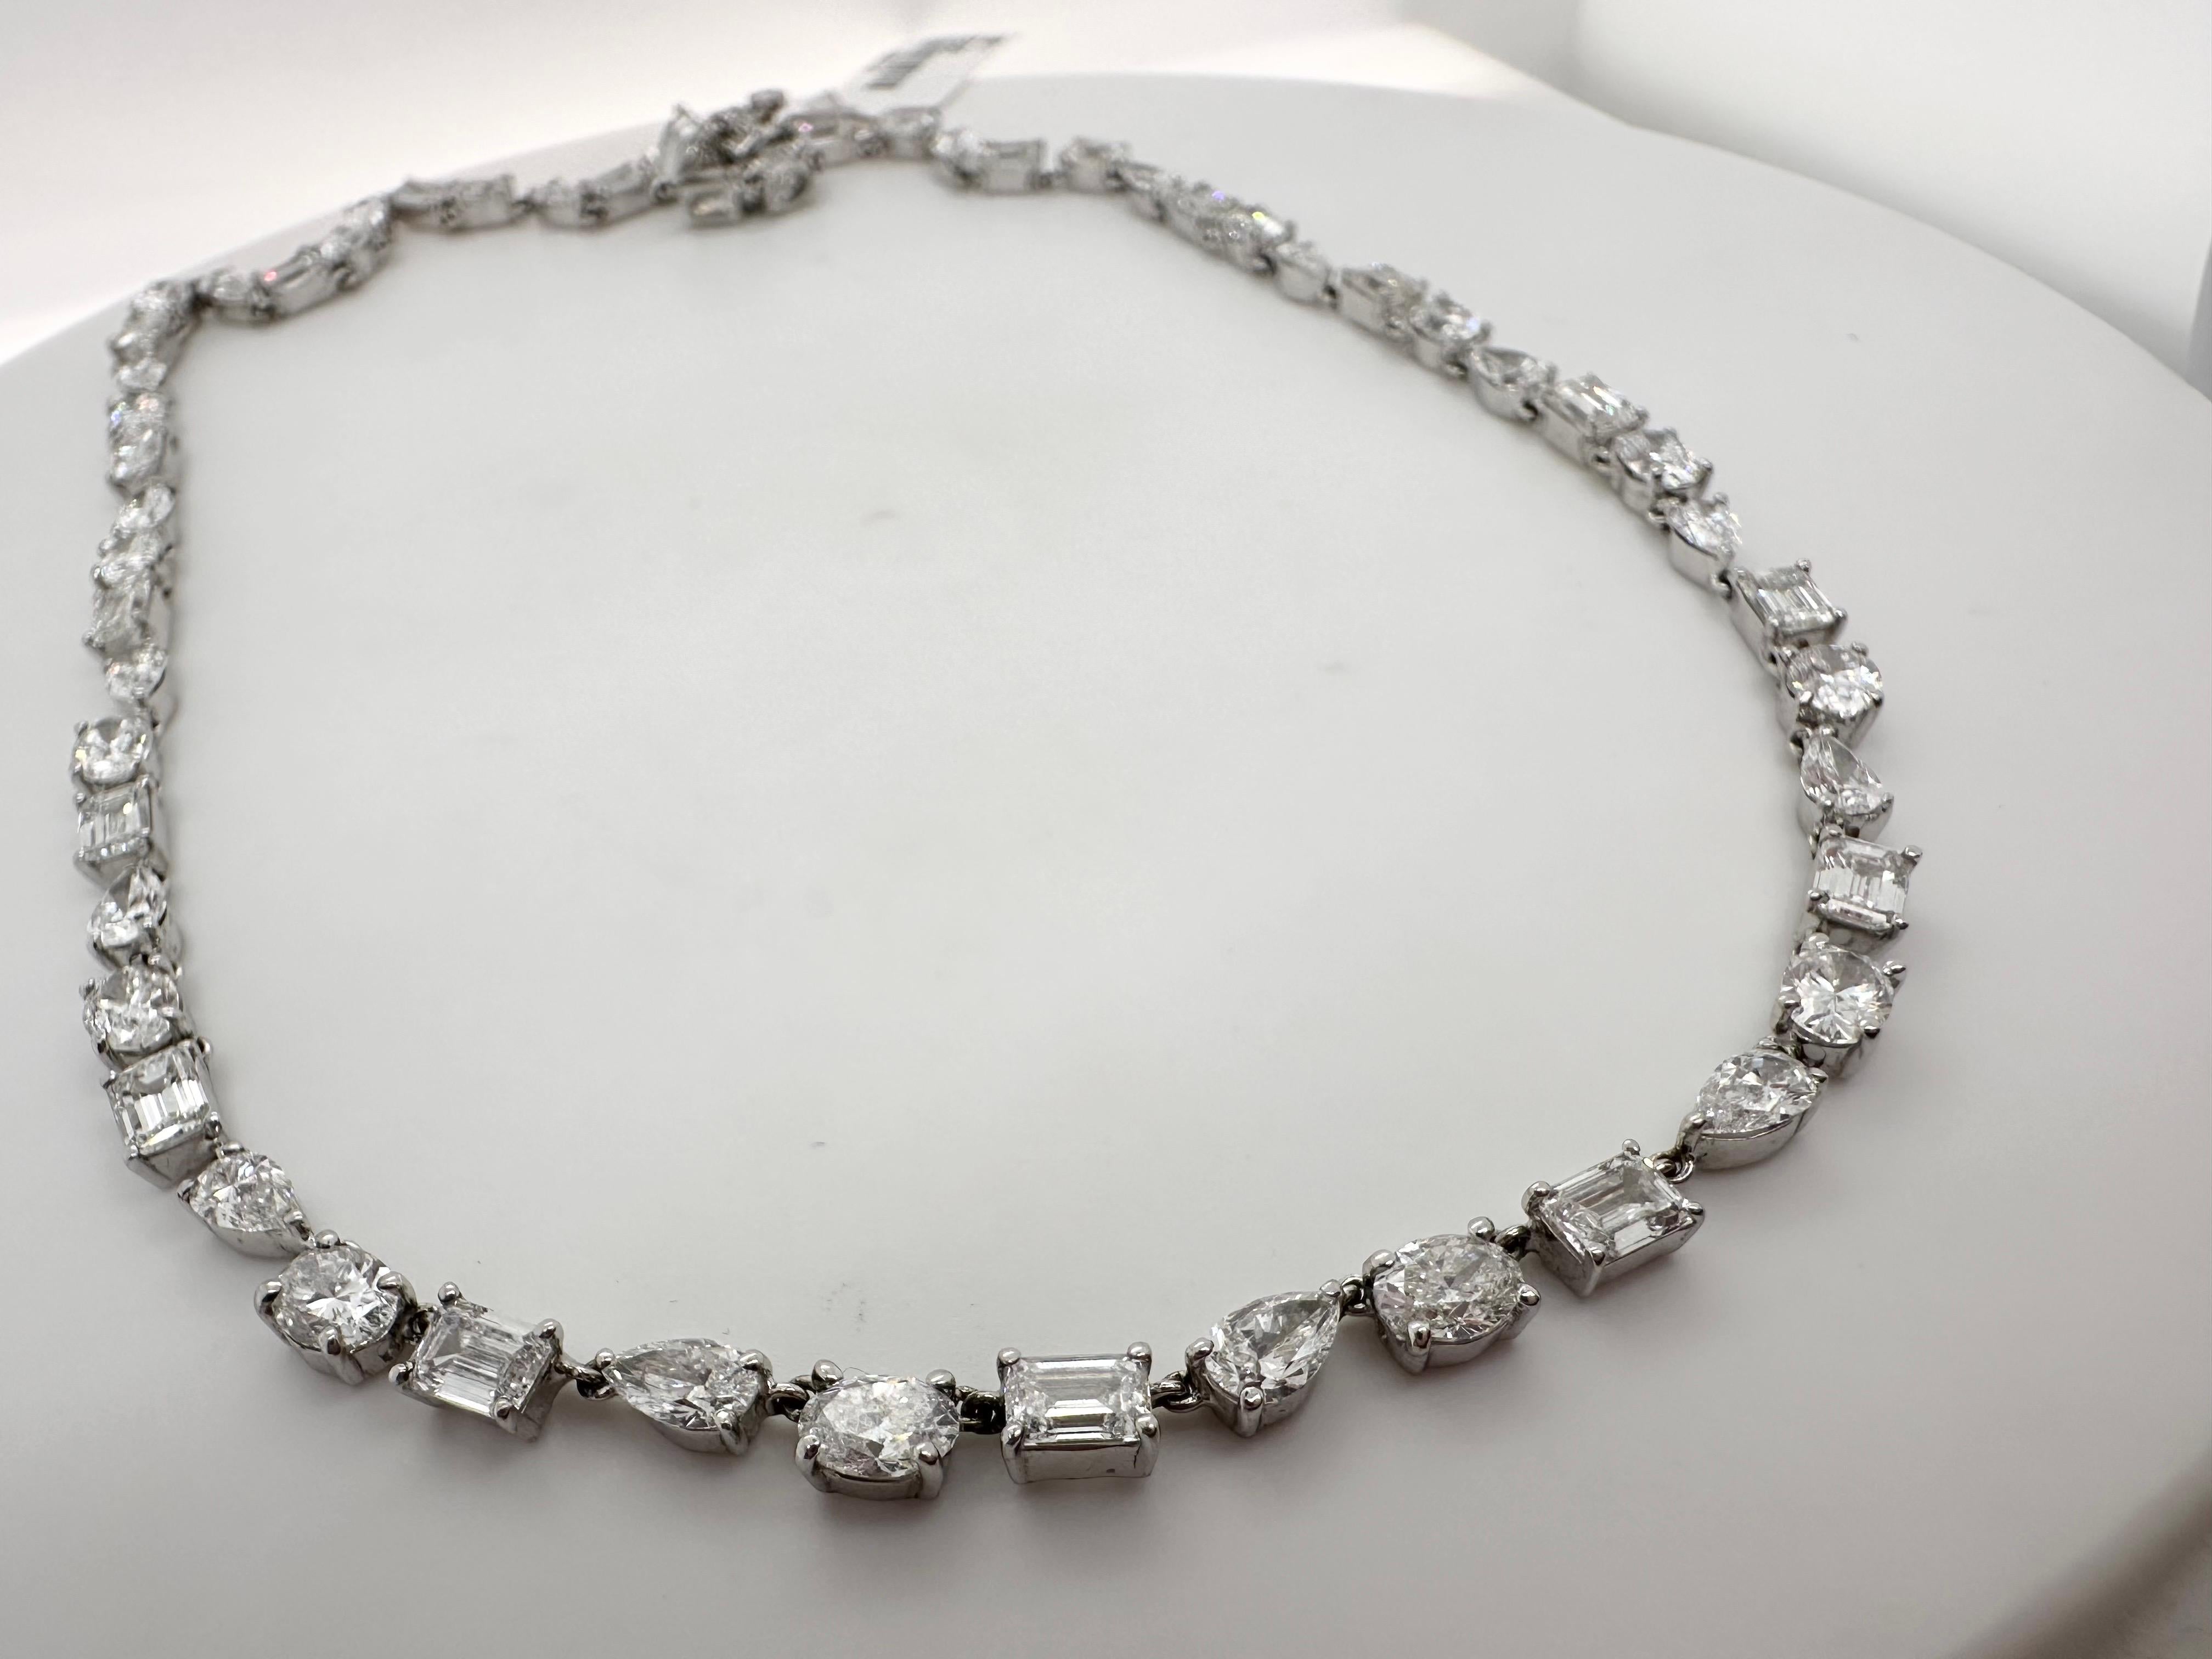 13 carats stunning diamond necklace of fine quality diamonds VVS-VS and F color. Made in this unique choker style necklace at 15 inches long with multiple shape diamonds so perfect for a night out as well as everyday wear! This necklace is made in